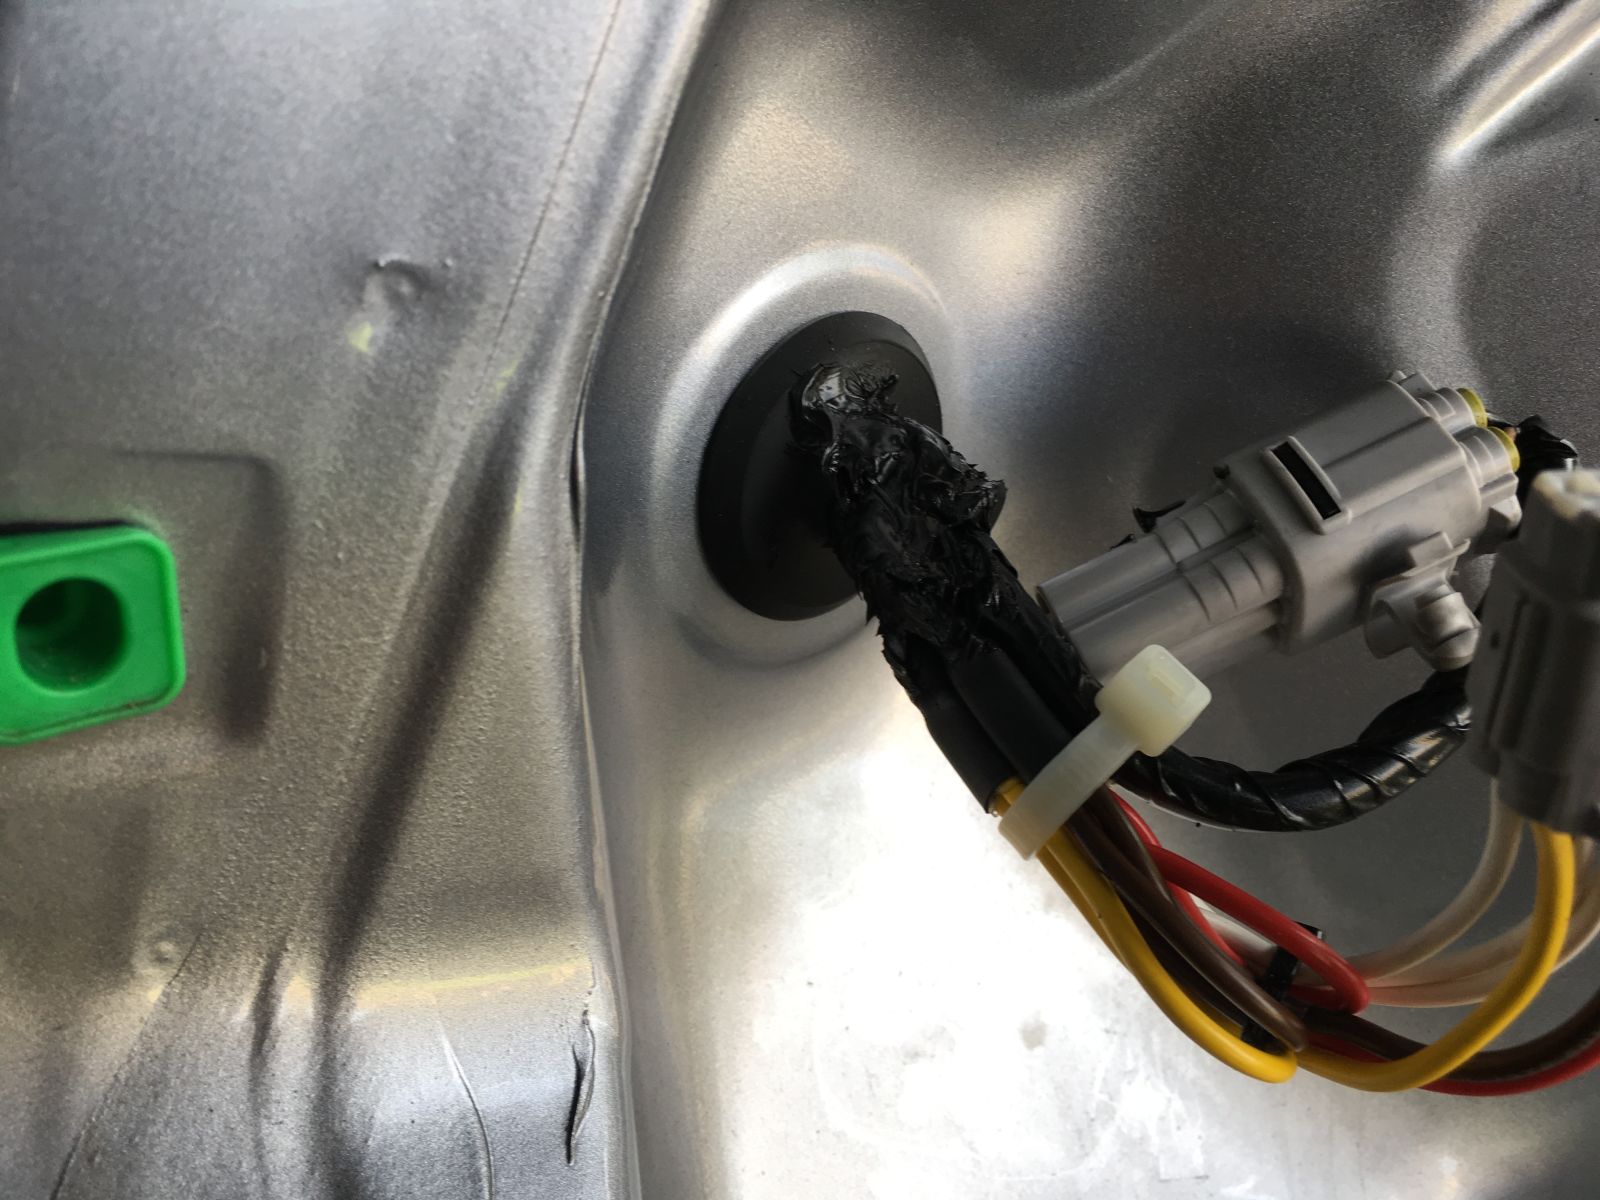 Look at the size of that grey plastic plug connection they wanted me to “squeeze” through the grommet!